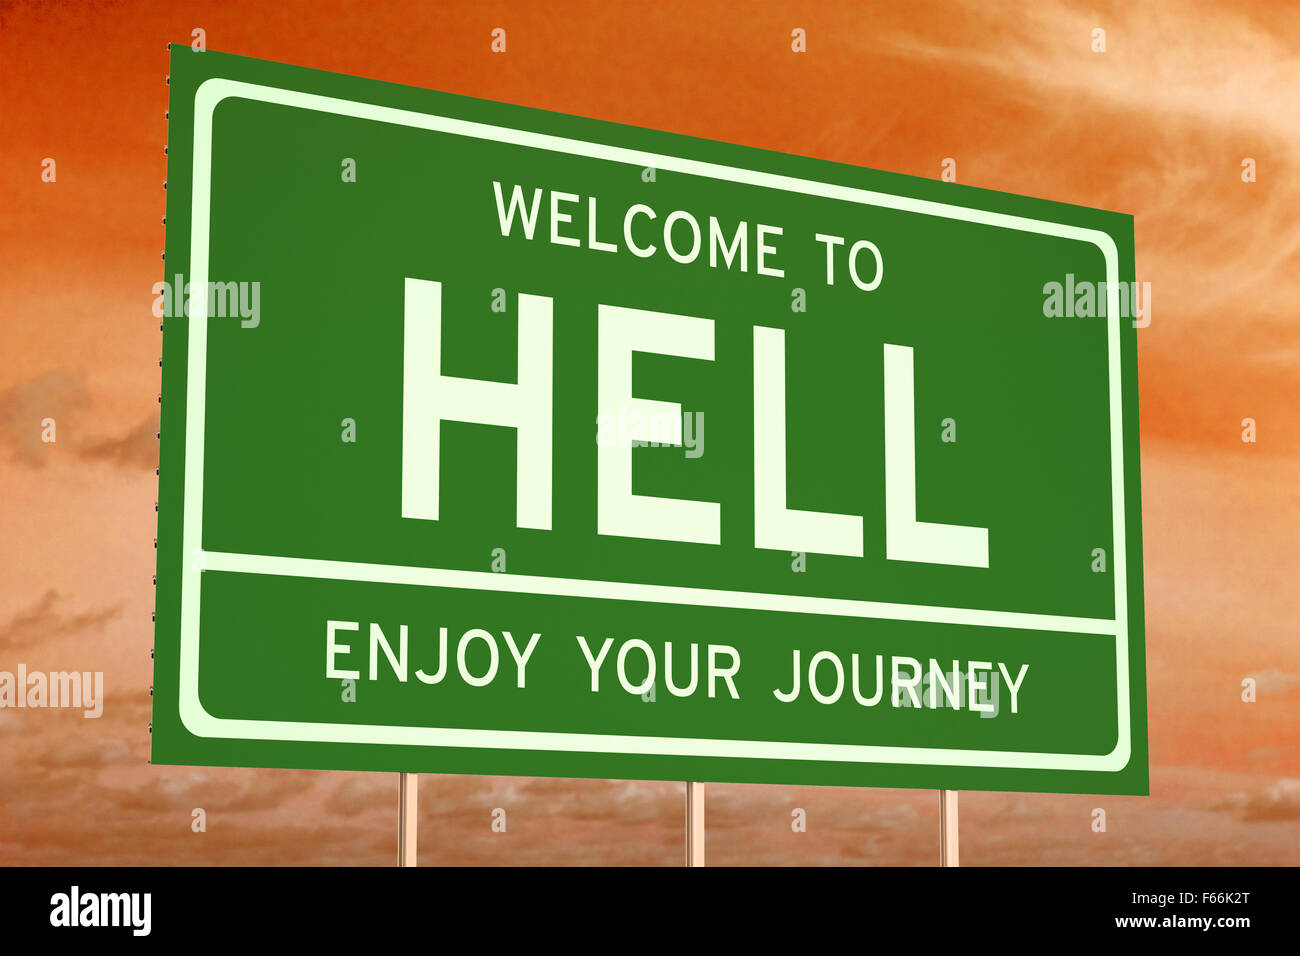 https://c8.alamy.com/comp/F66K2T/welcome-to-hell-concept-on-road-billboard-F66K2T.jpg